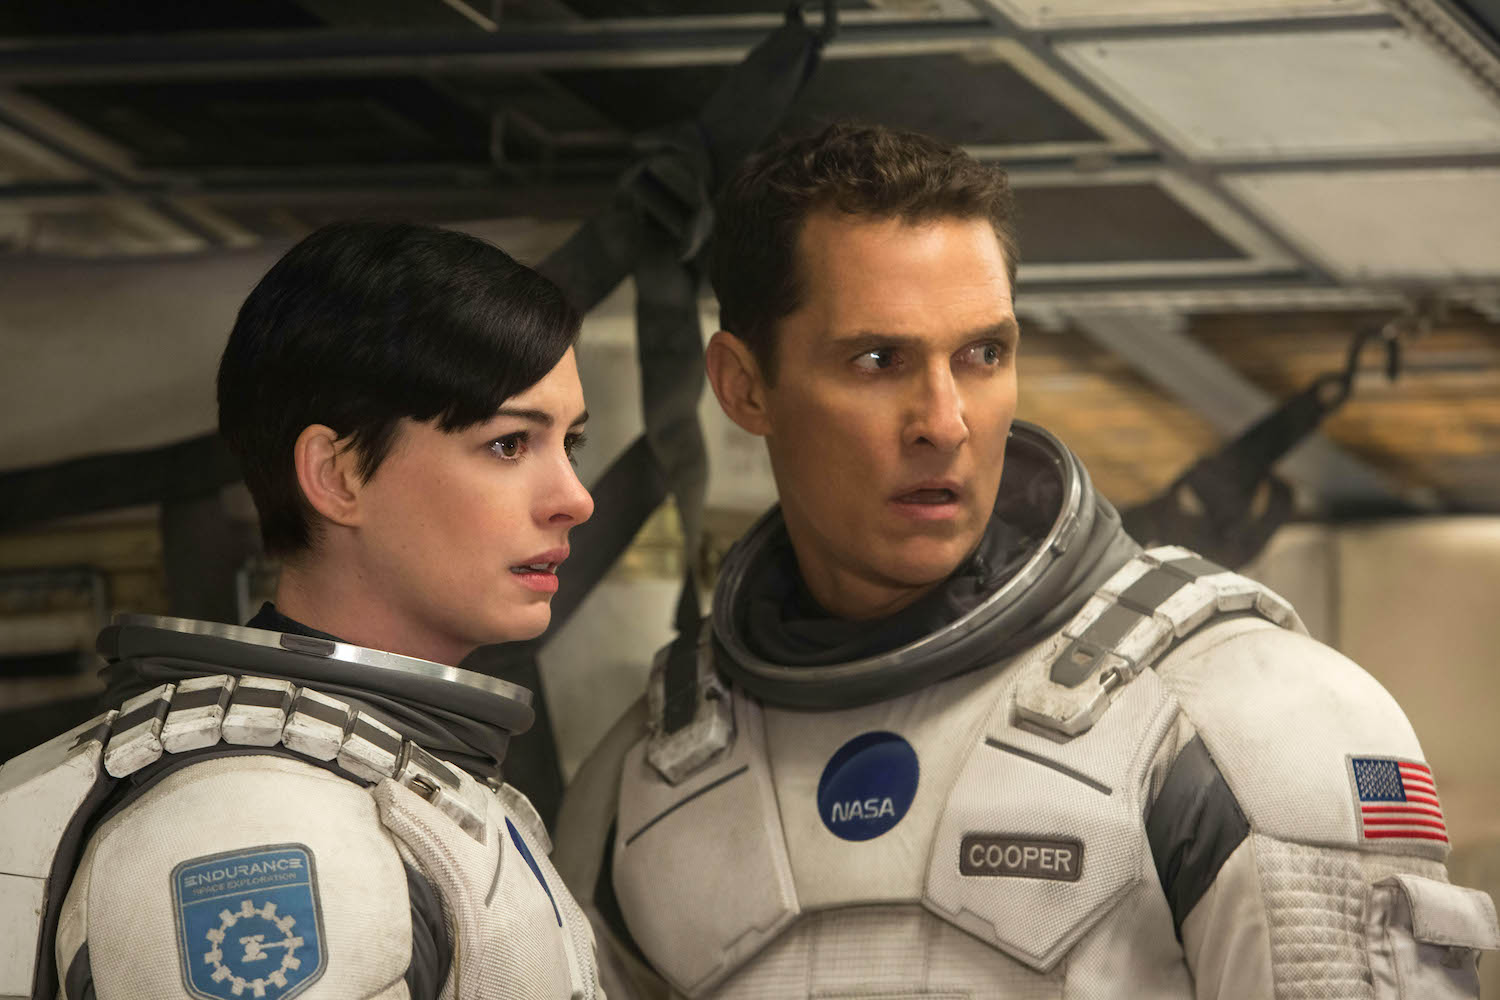 Left to right: Matthew McConaughey and Anne Hathaway in INTERSTELLAR, from Paramount Pictures and Warner Brothers Entertainment.